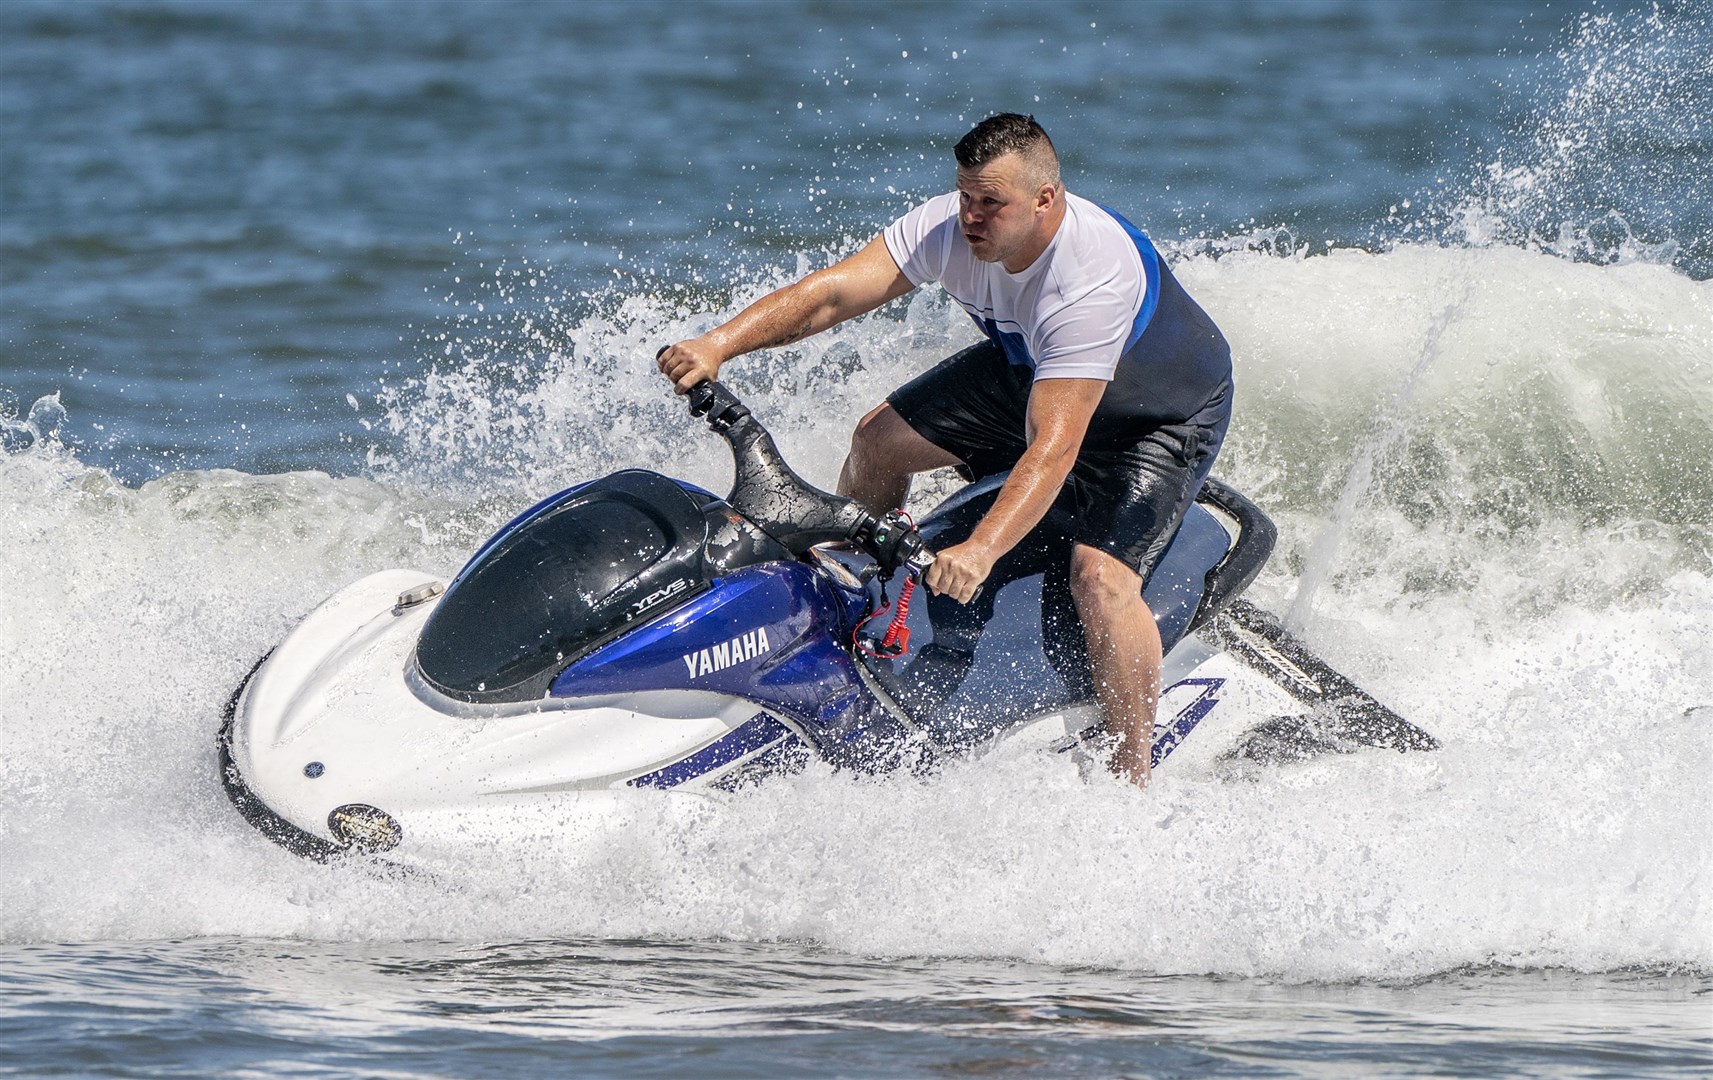 A man on a jet ski takes to the water in Scarborough (Danny Lawson/PA)